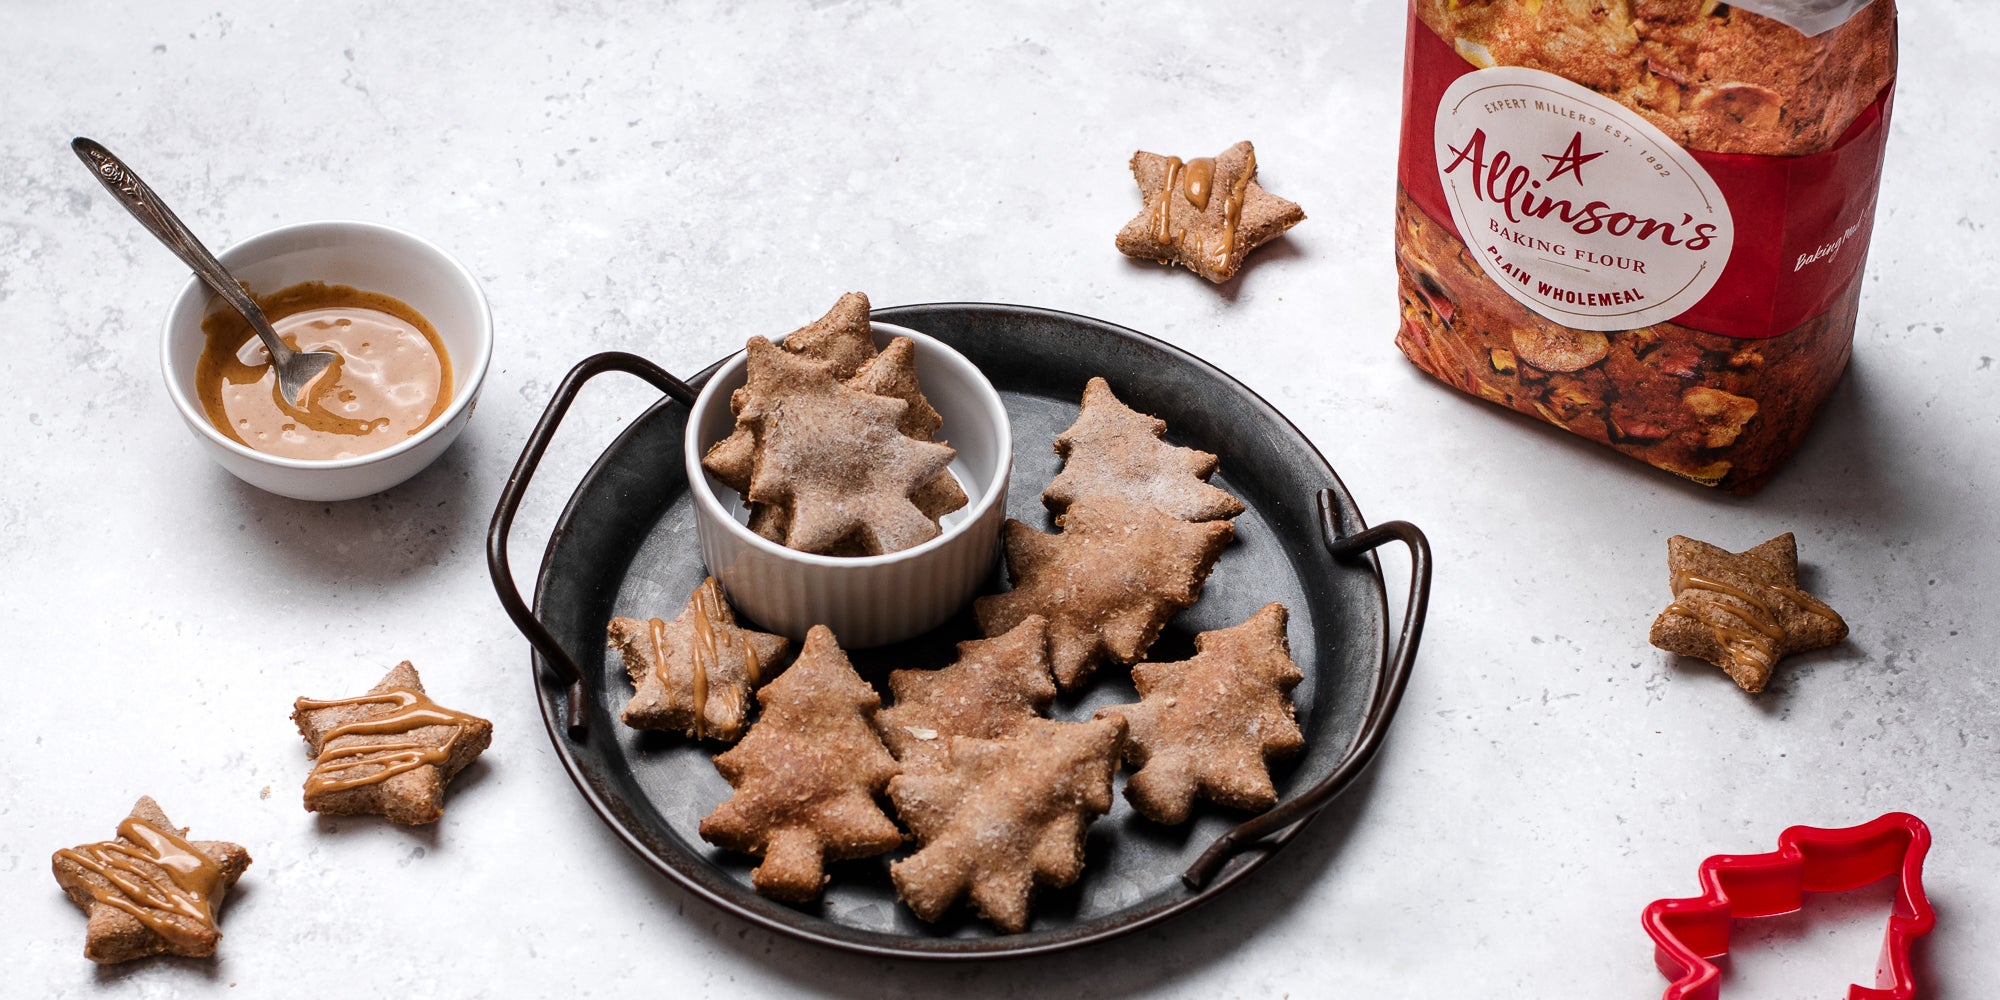 Dog Biscuits cut into festive tree shapes drizzled with Proper Nutty peanut butter next to a bag of Allinsons plain flour